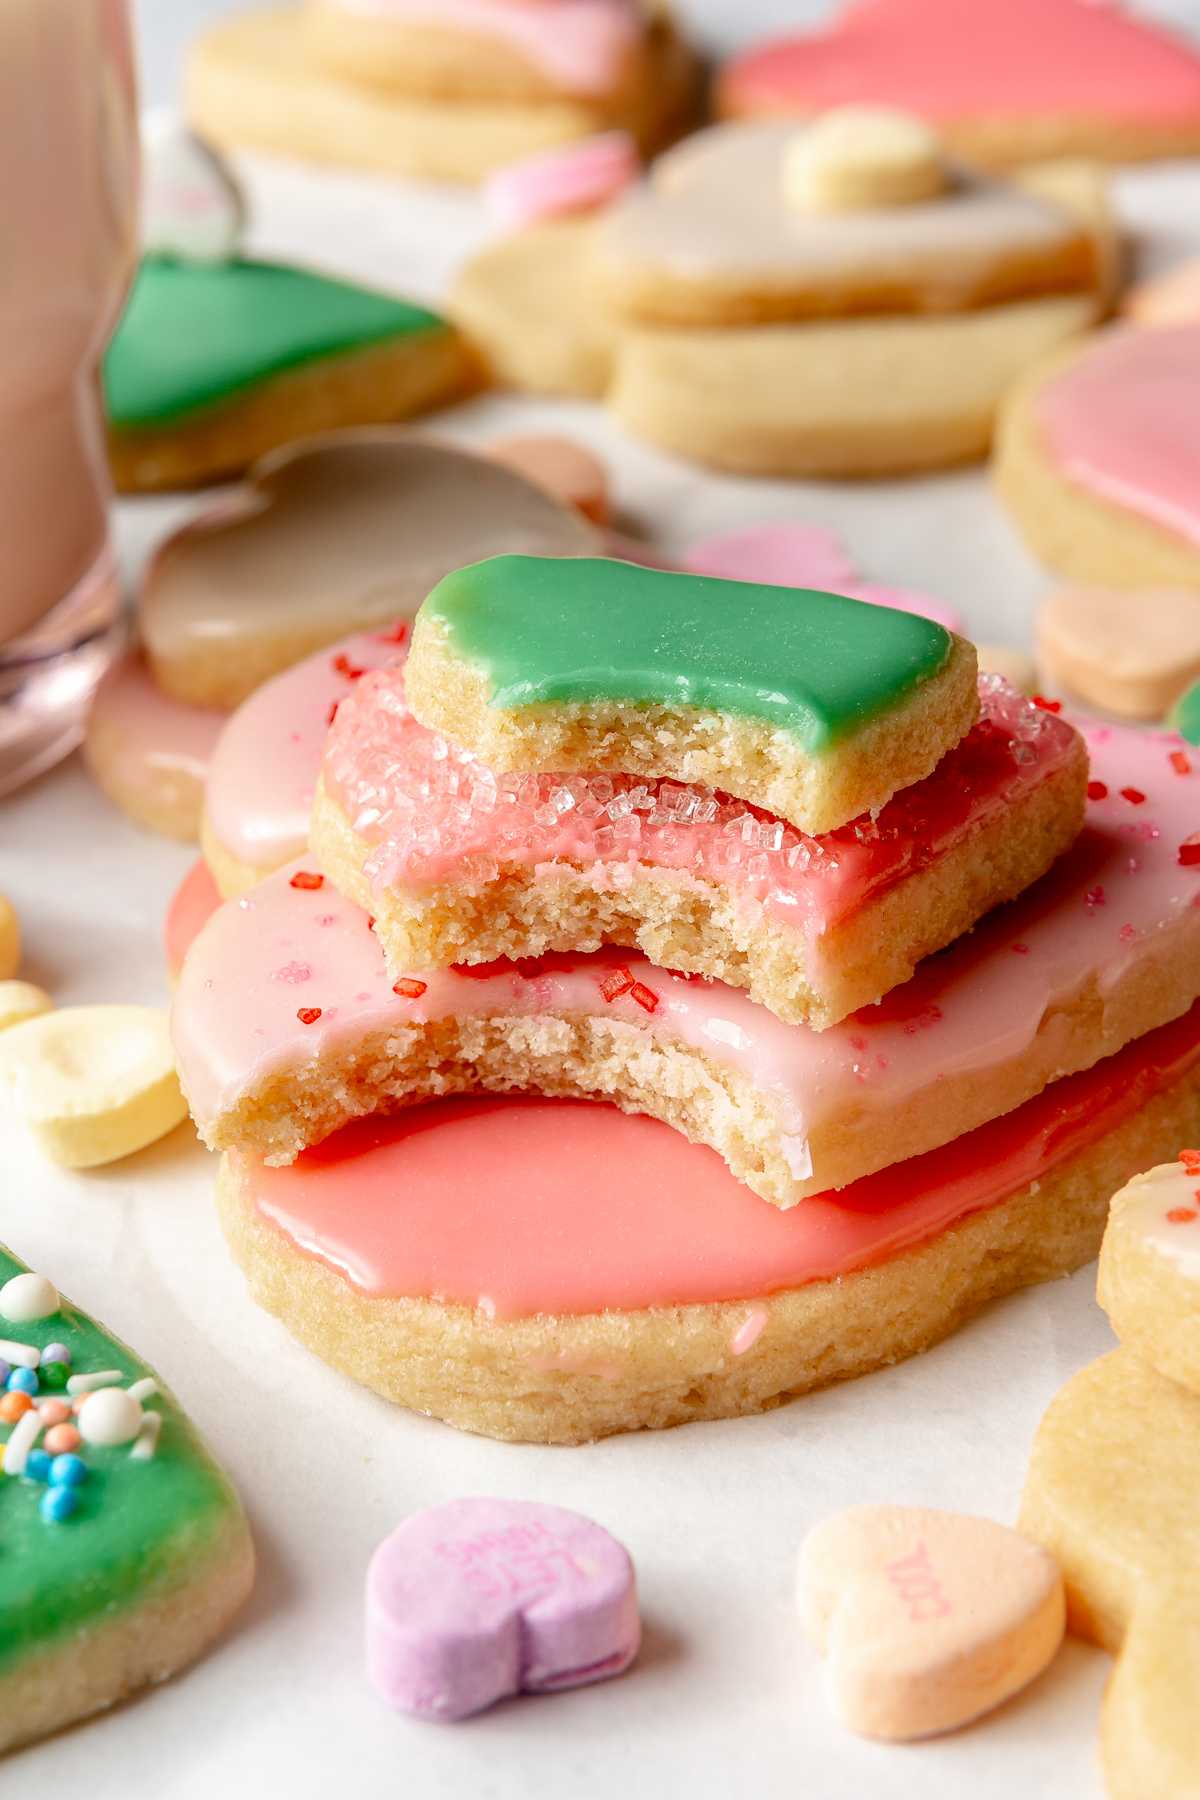 Iced cookies stacked with a bite taken out of each one.